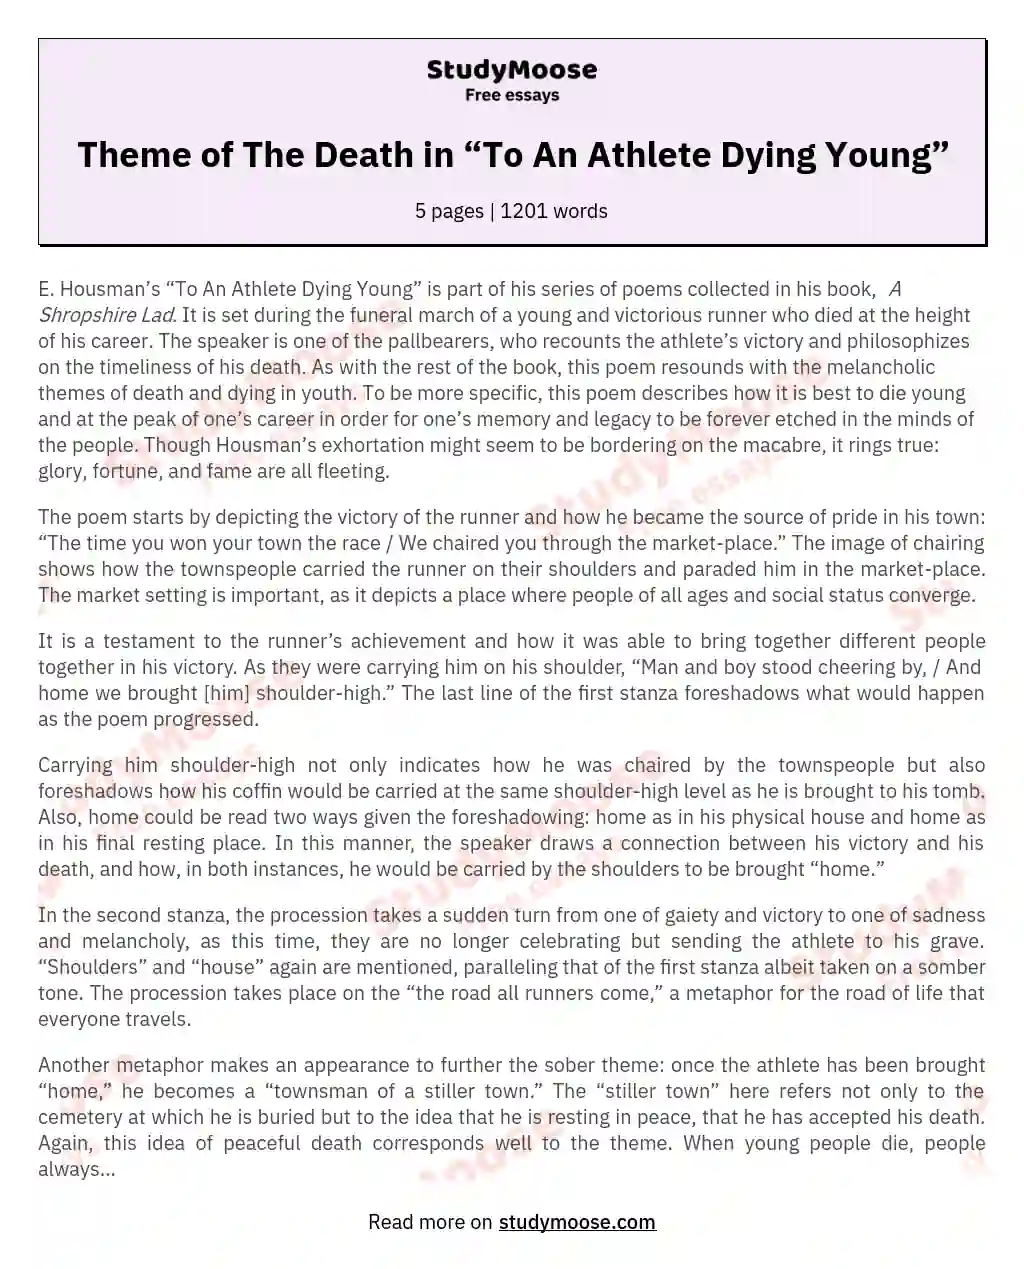 Theme of The Death in “To An Athlete Dying Young”